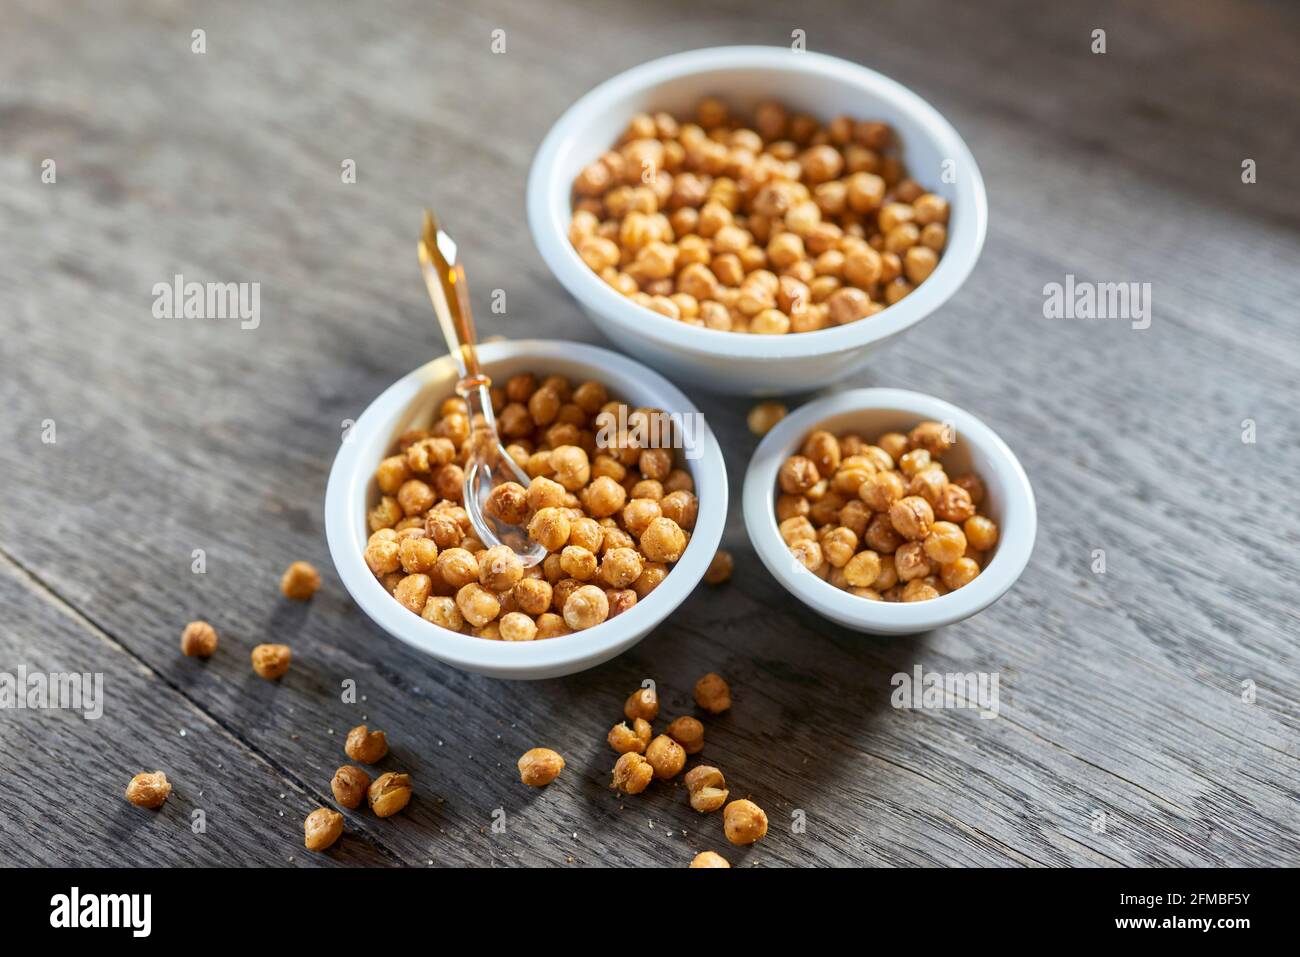 Ayurvedic cuisine - Oven-roasted chickpeas in porcelain bowls of various sizes on a wooden plate Stock Photo